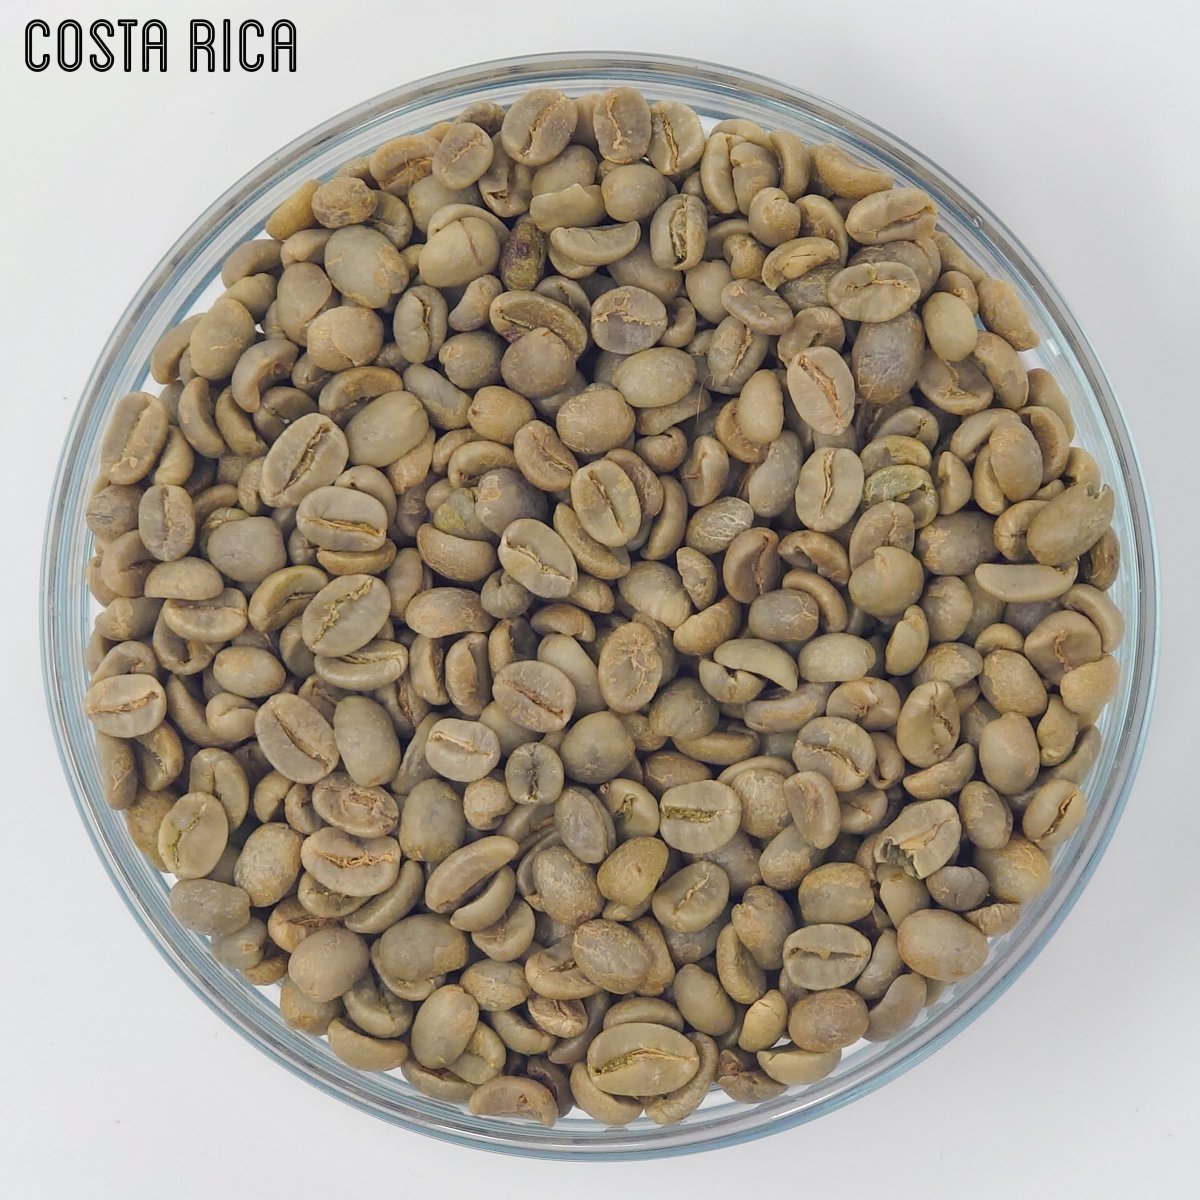 Green Unroasted Coffee | Costa Rica | For Home Roasters, 227g - Brown Bear Coffee